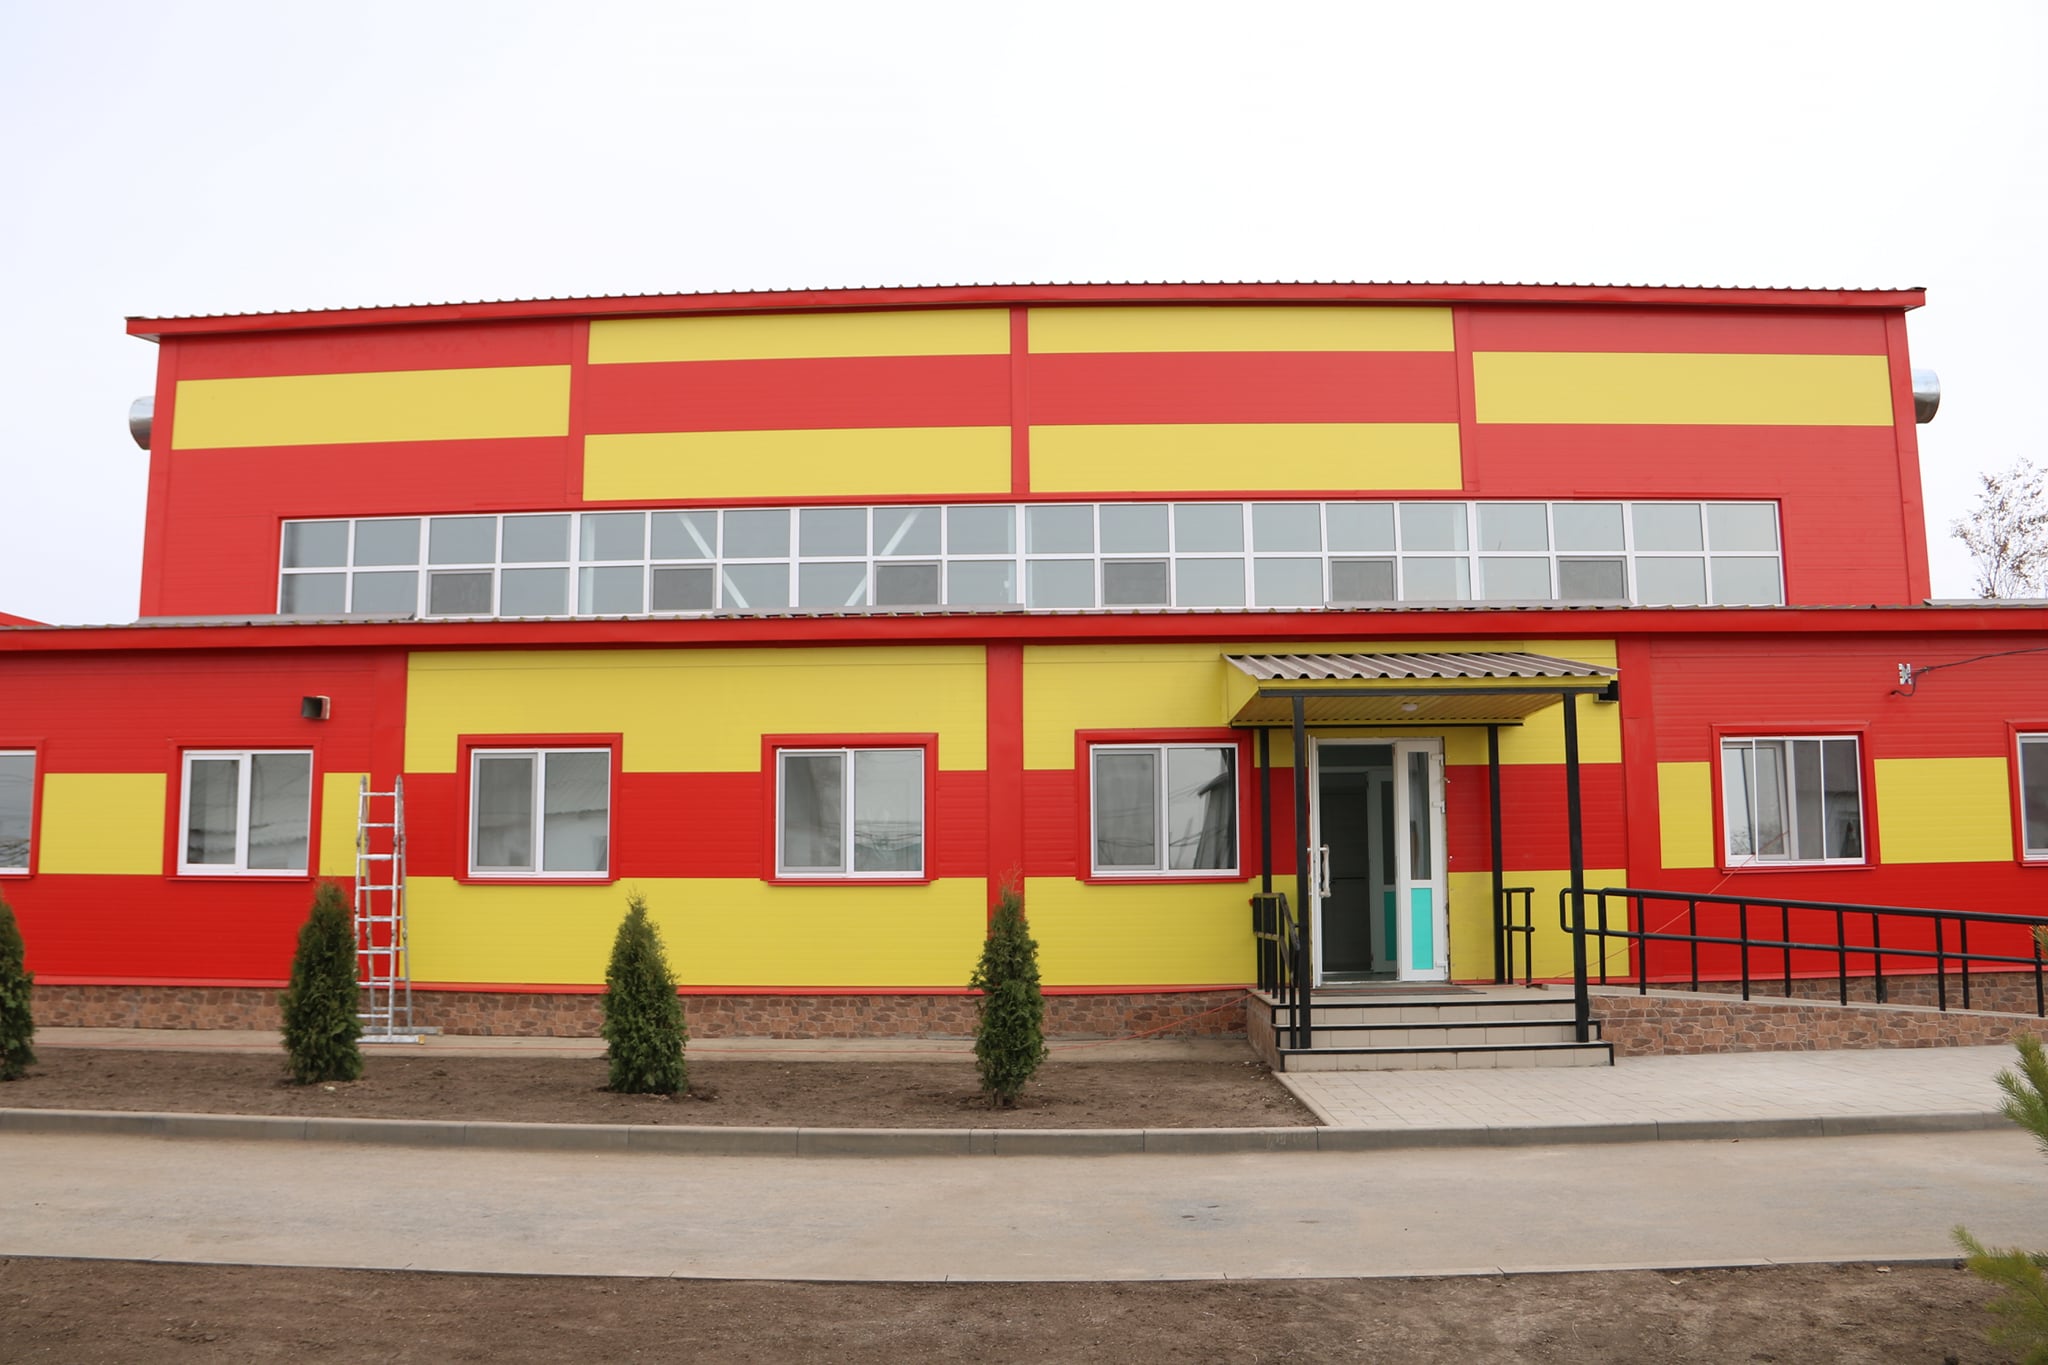 Deputy akim of the region Timurzhan Adiyetovich inspected the construction of a gym on the "employment roadmap" at the main school named after A. Orazbayeva in the village of Zhanibek.